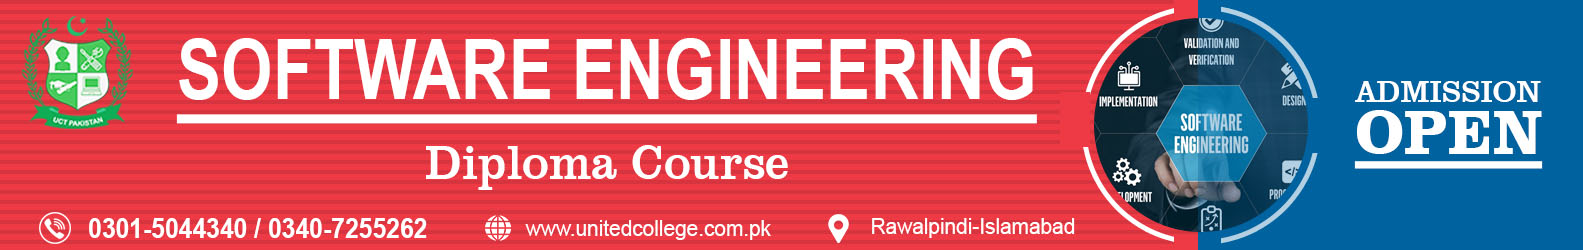 SOFTWARE ENGINEERING COURSE